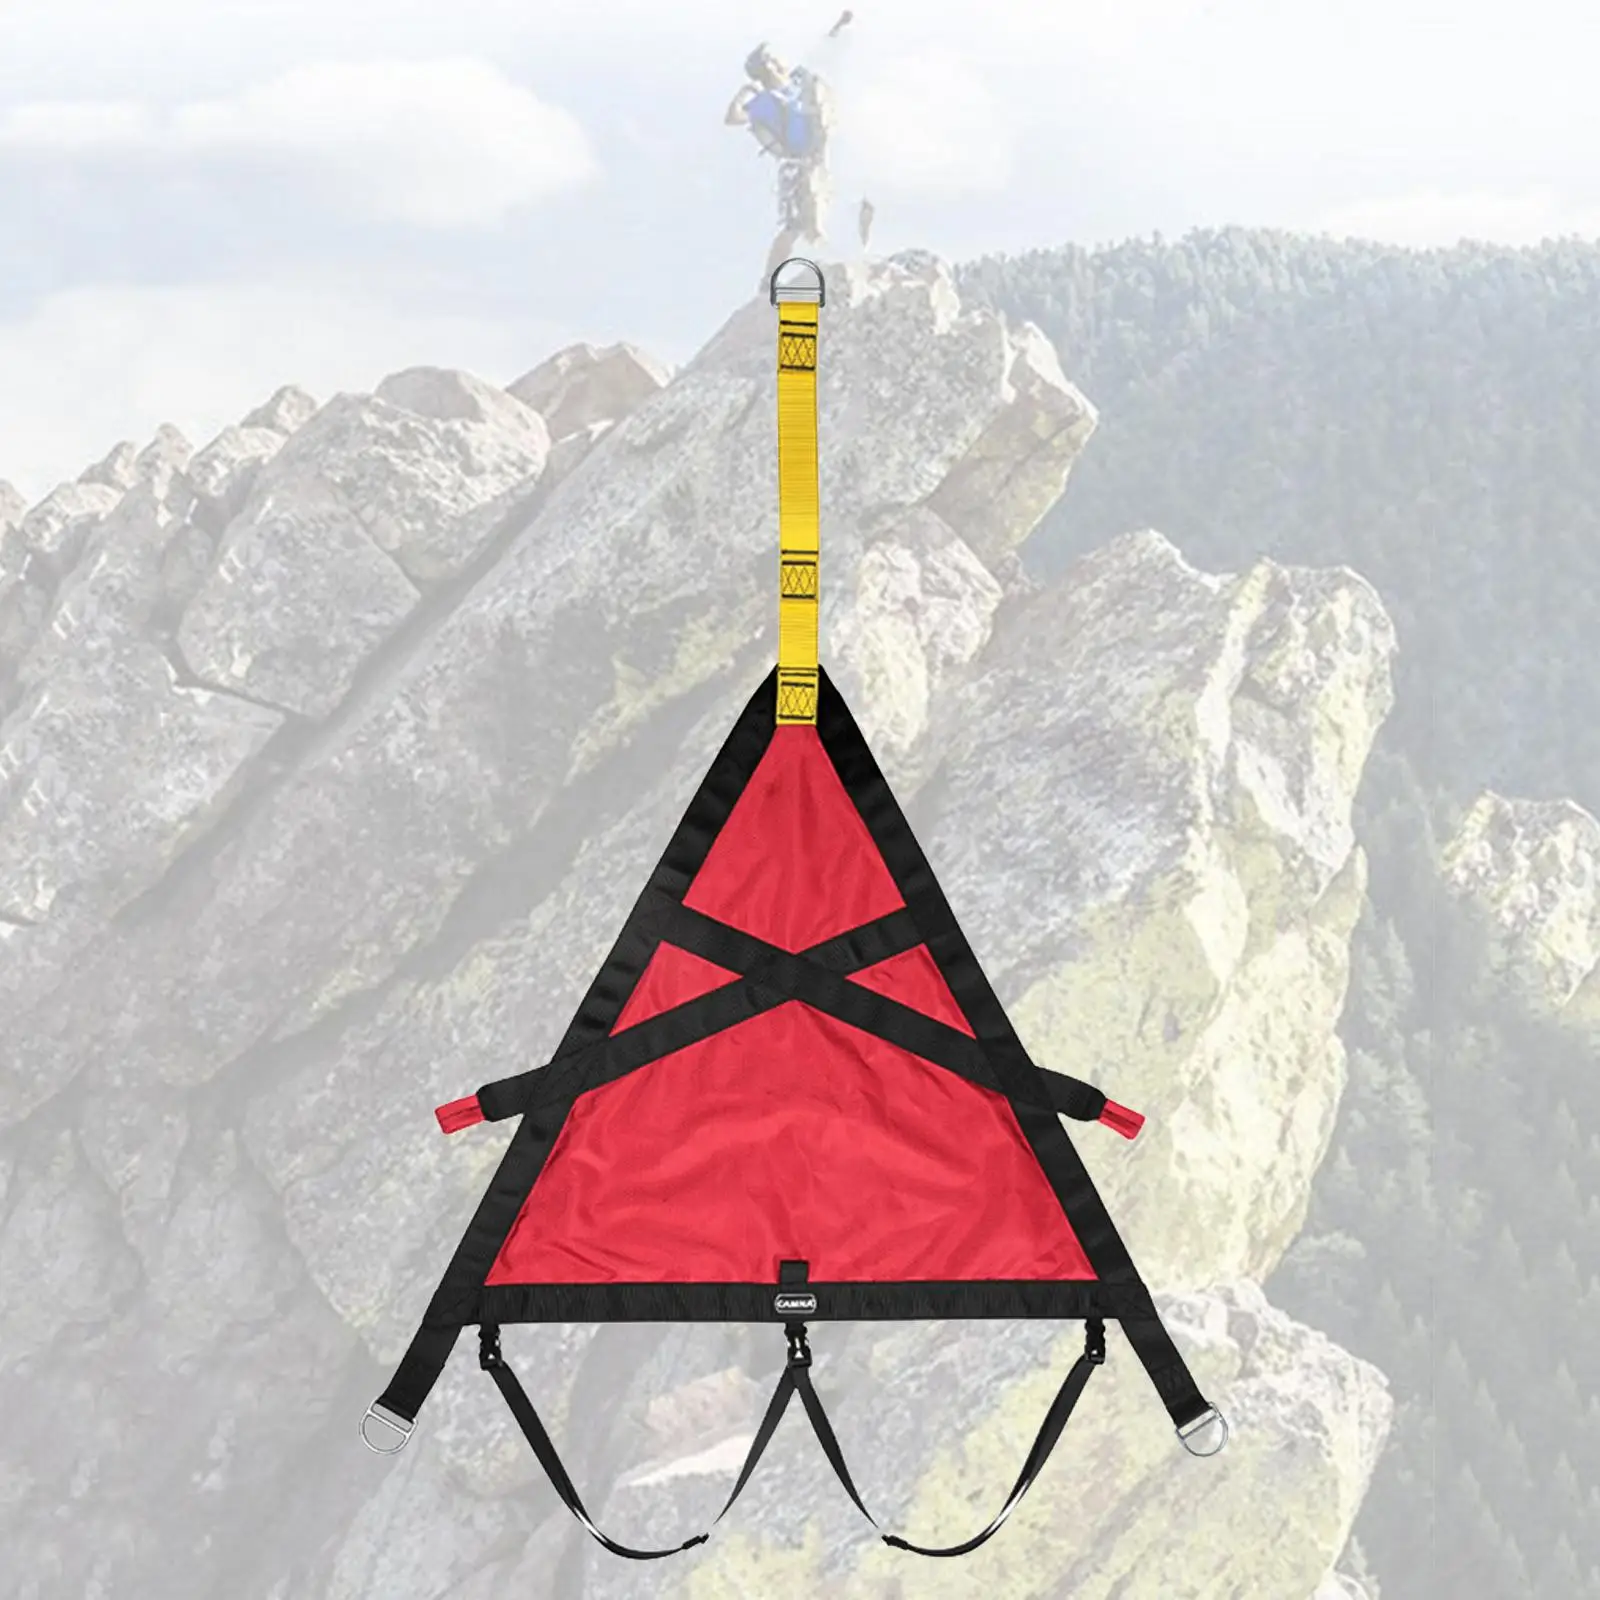 Triangle Evacuation Harness Outdoor Climbing Safety Belt for Mountaineering